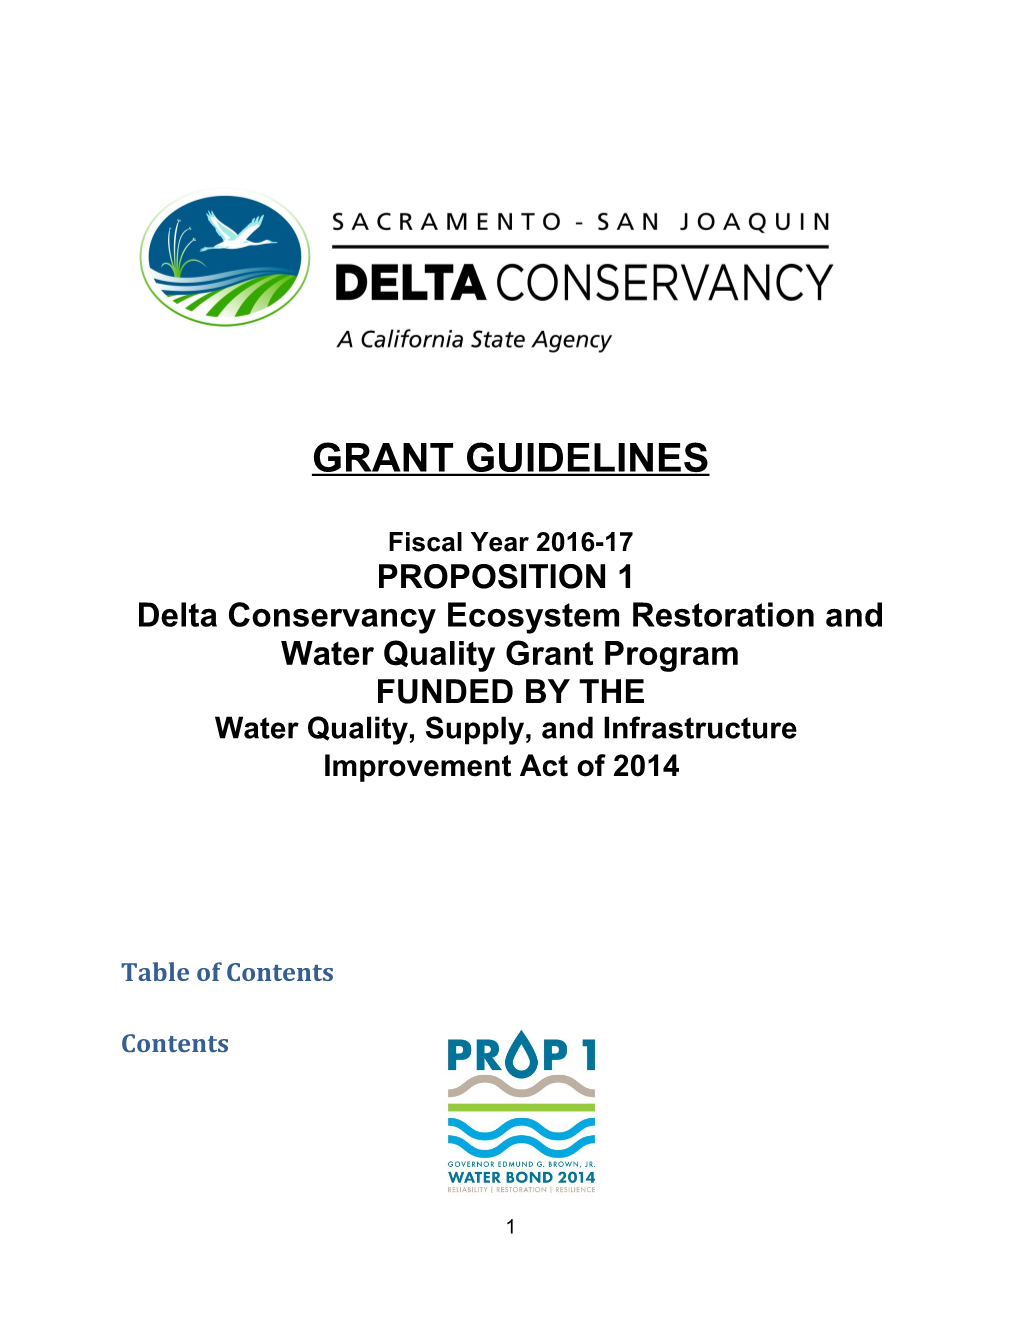 Delta Conservancy Ecosystem Restoration and Water Quality Grant Program